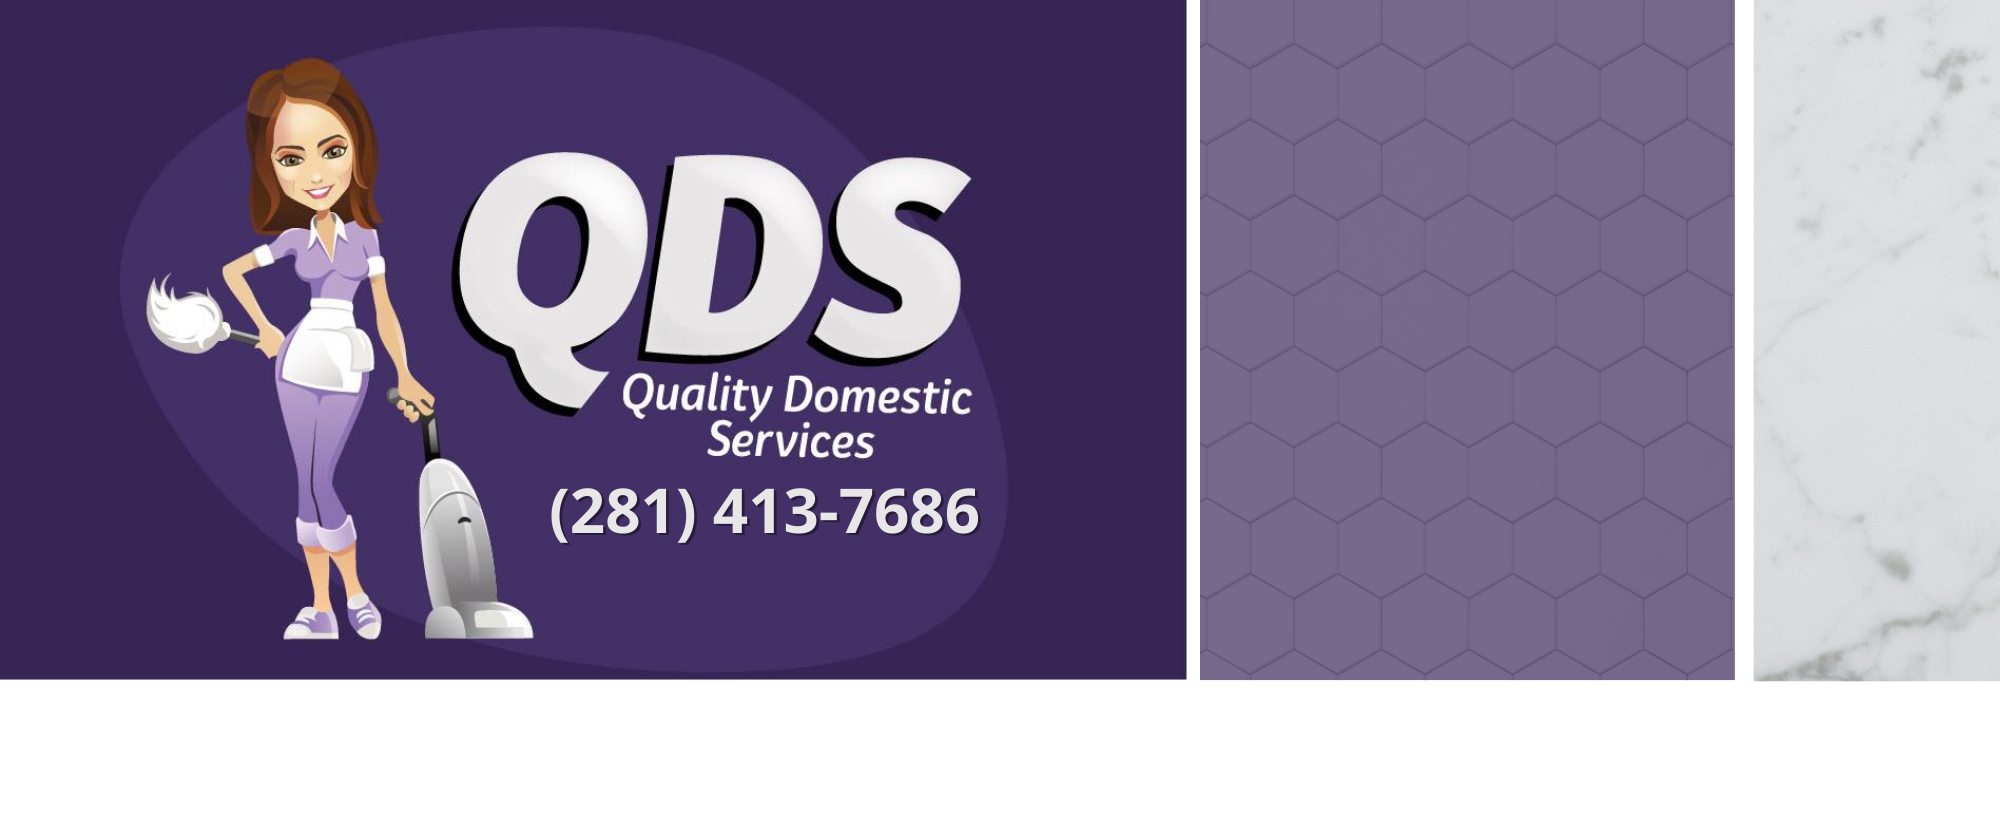 Quality Domestic Services 